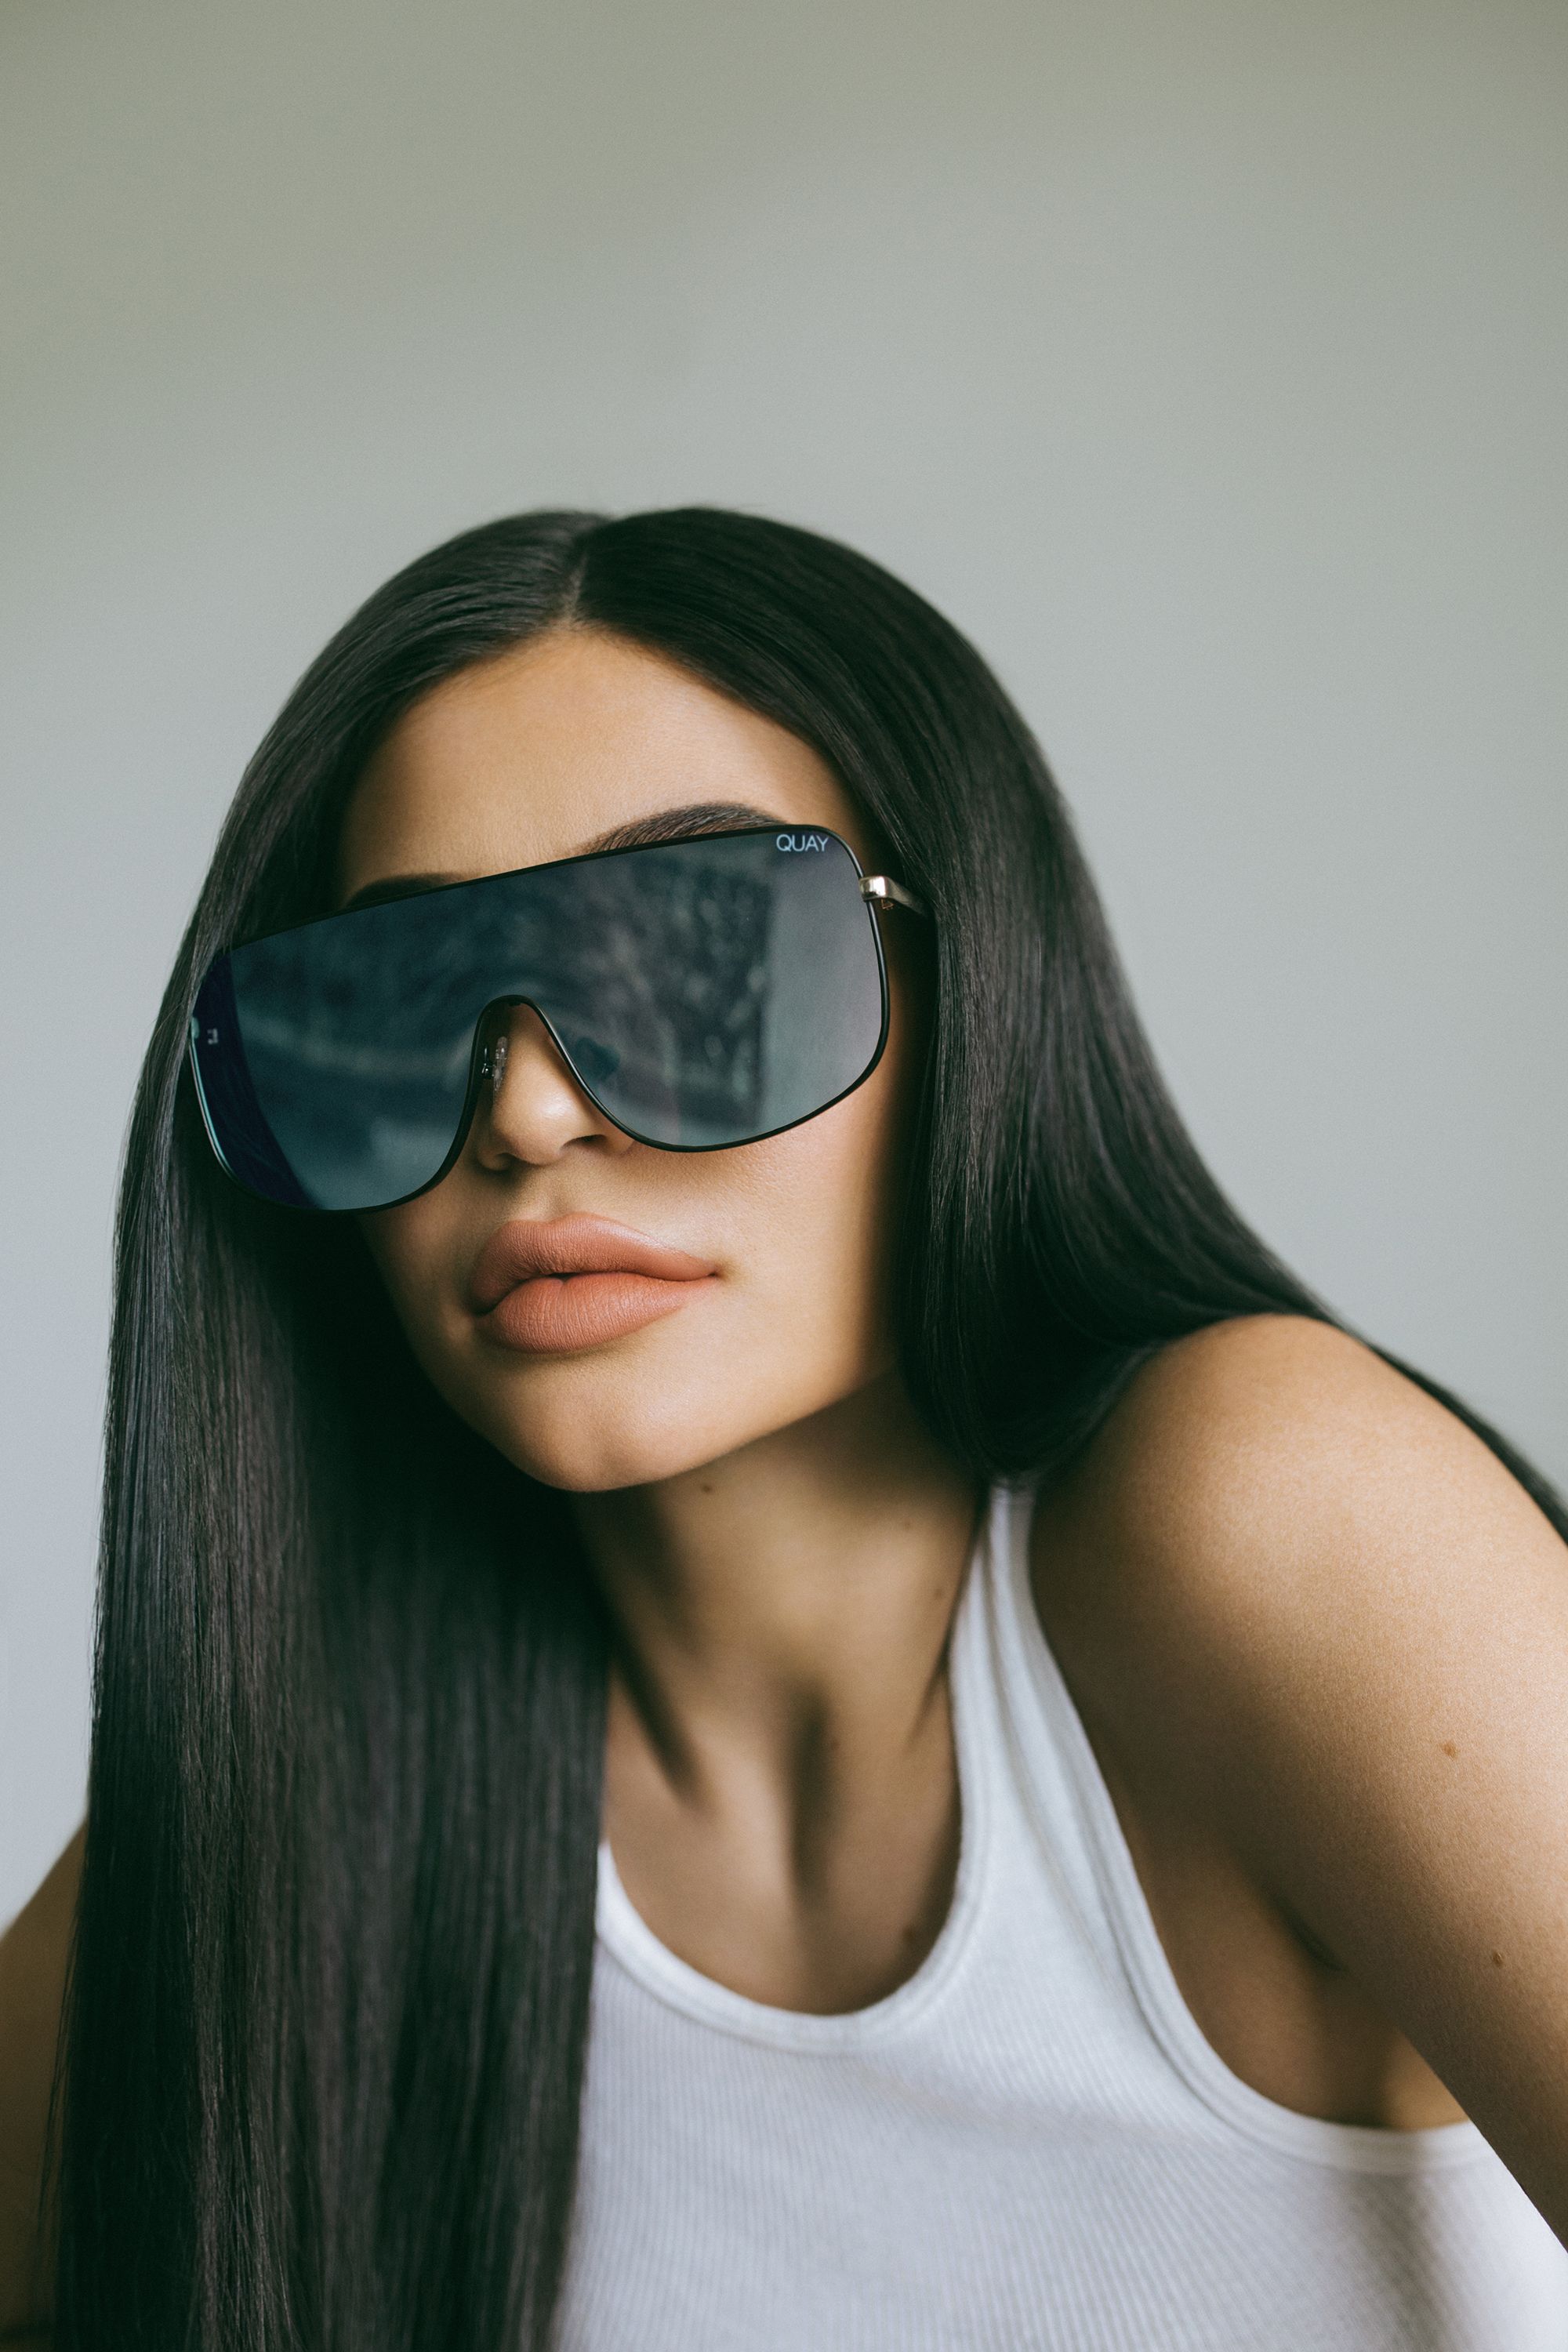 Kylie Jenner Launches Collaboration With Quay Australia